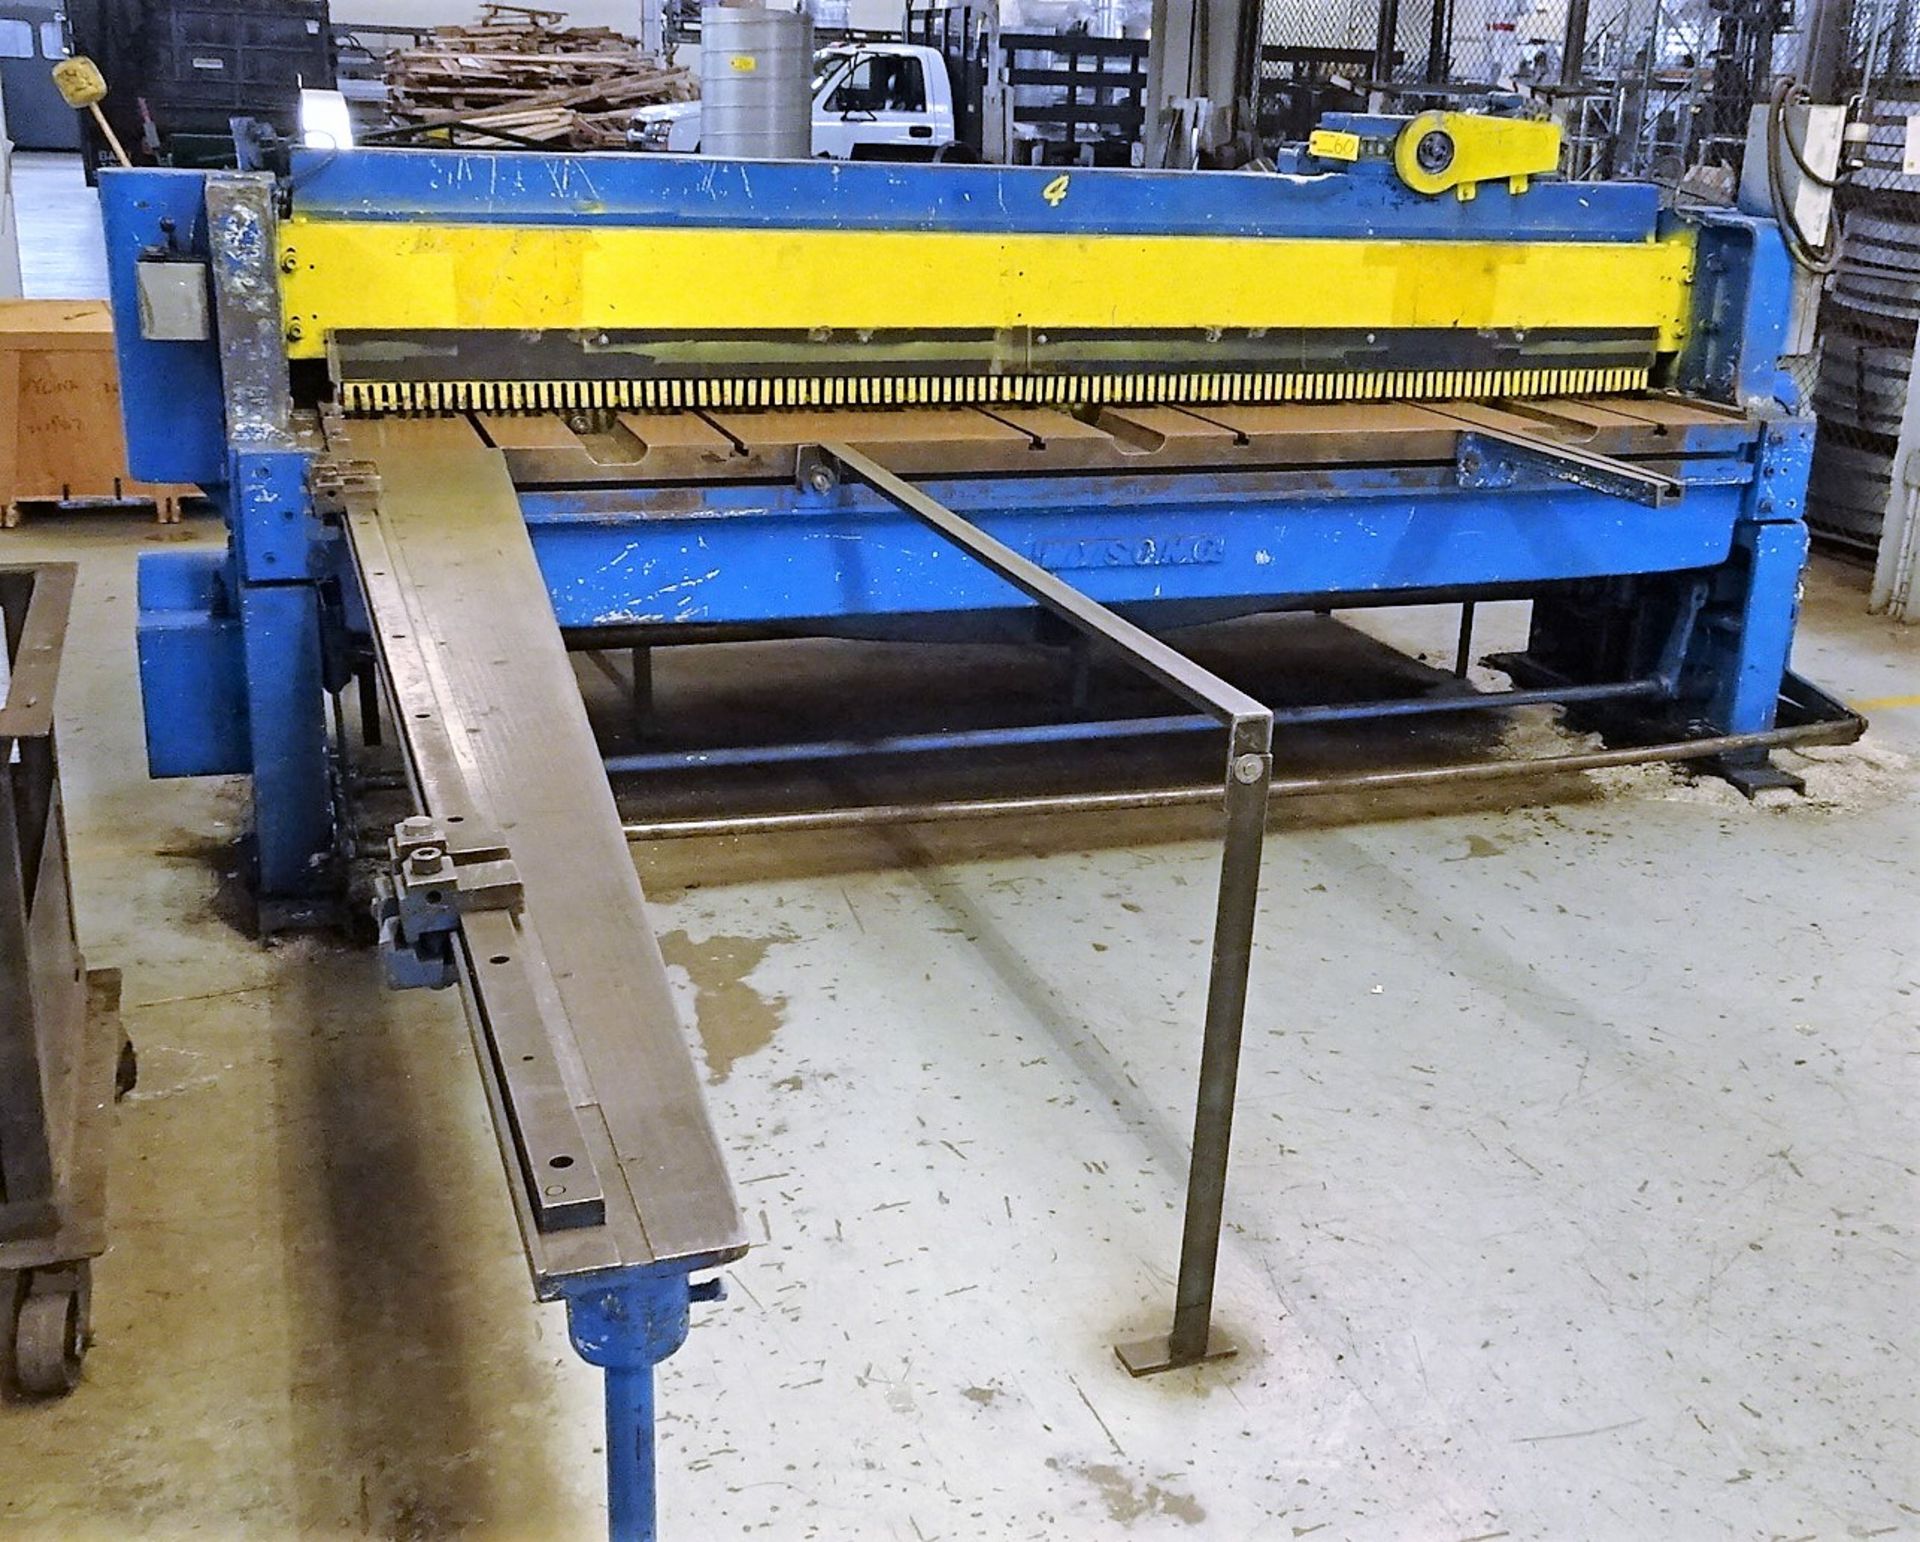 WYSONG 10' MECHANICAL SHEAR, APPROXIMATELY 10 GAUGE CAPACITY, SQUARING ARM, FRONT POWERED POWER BACK